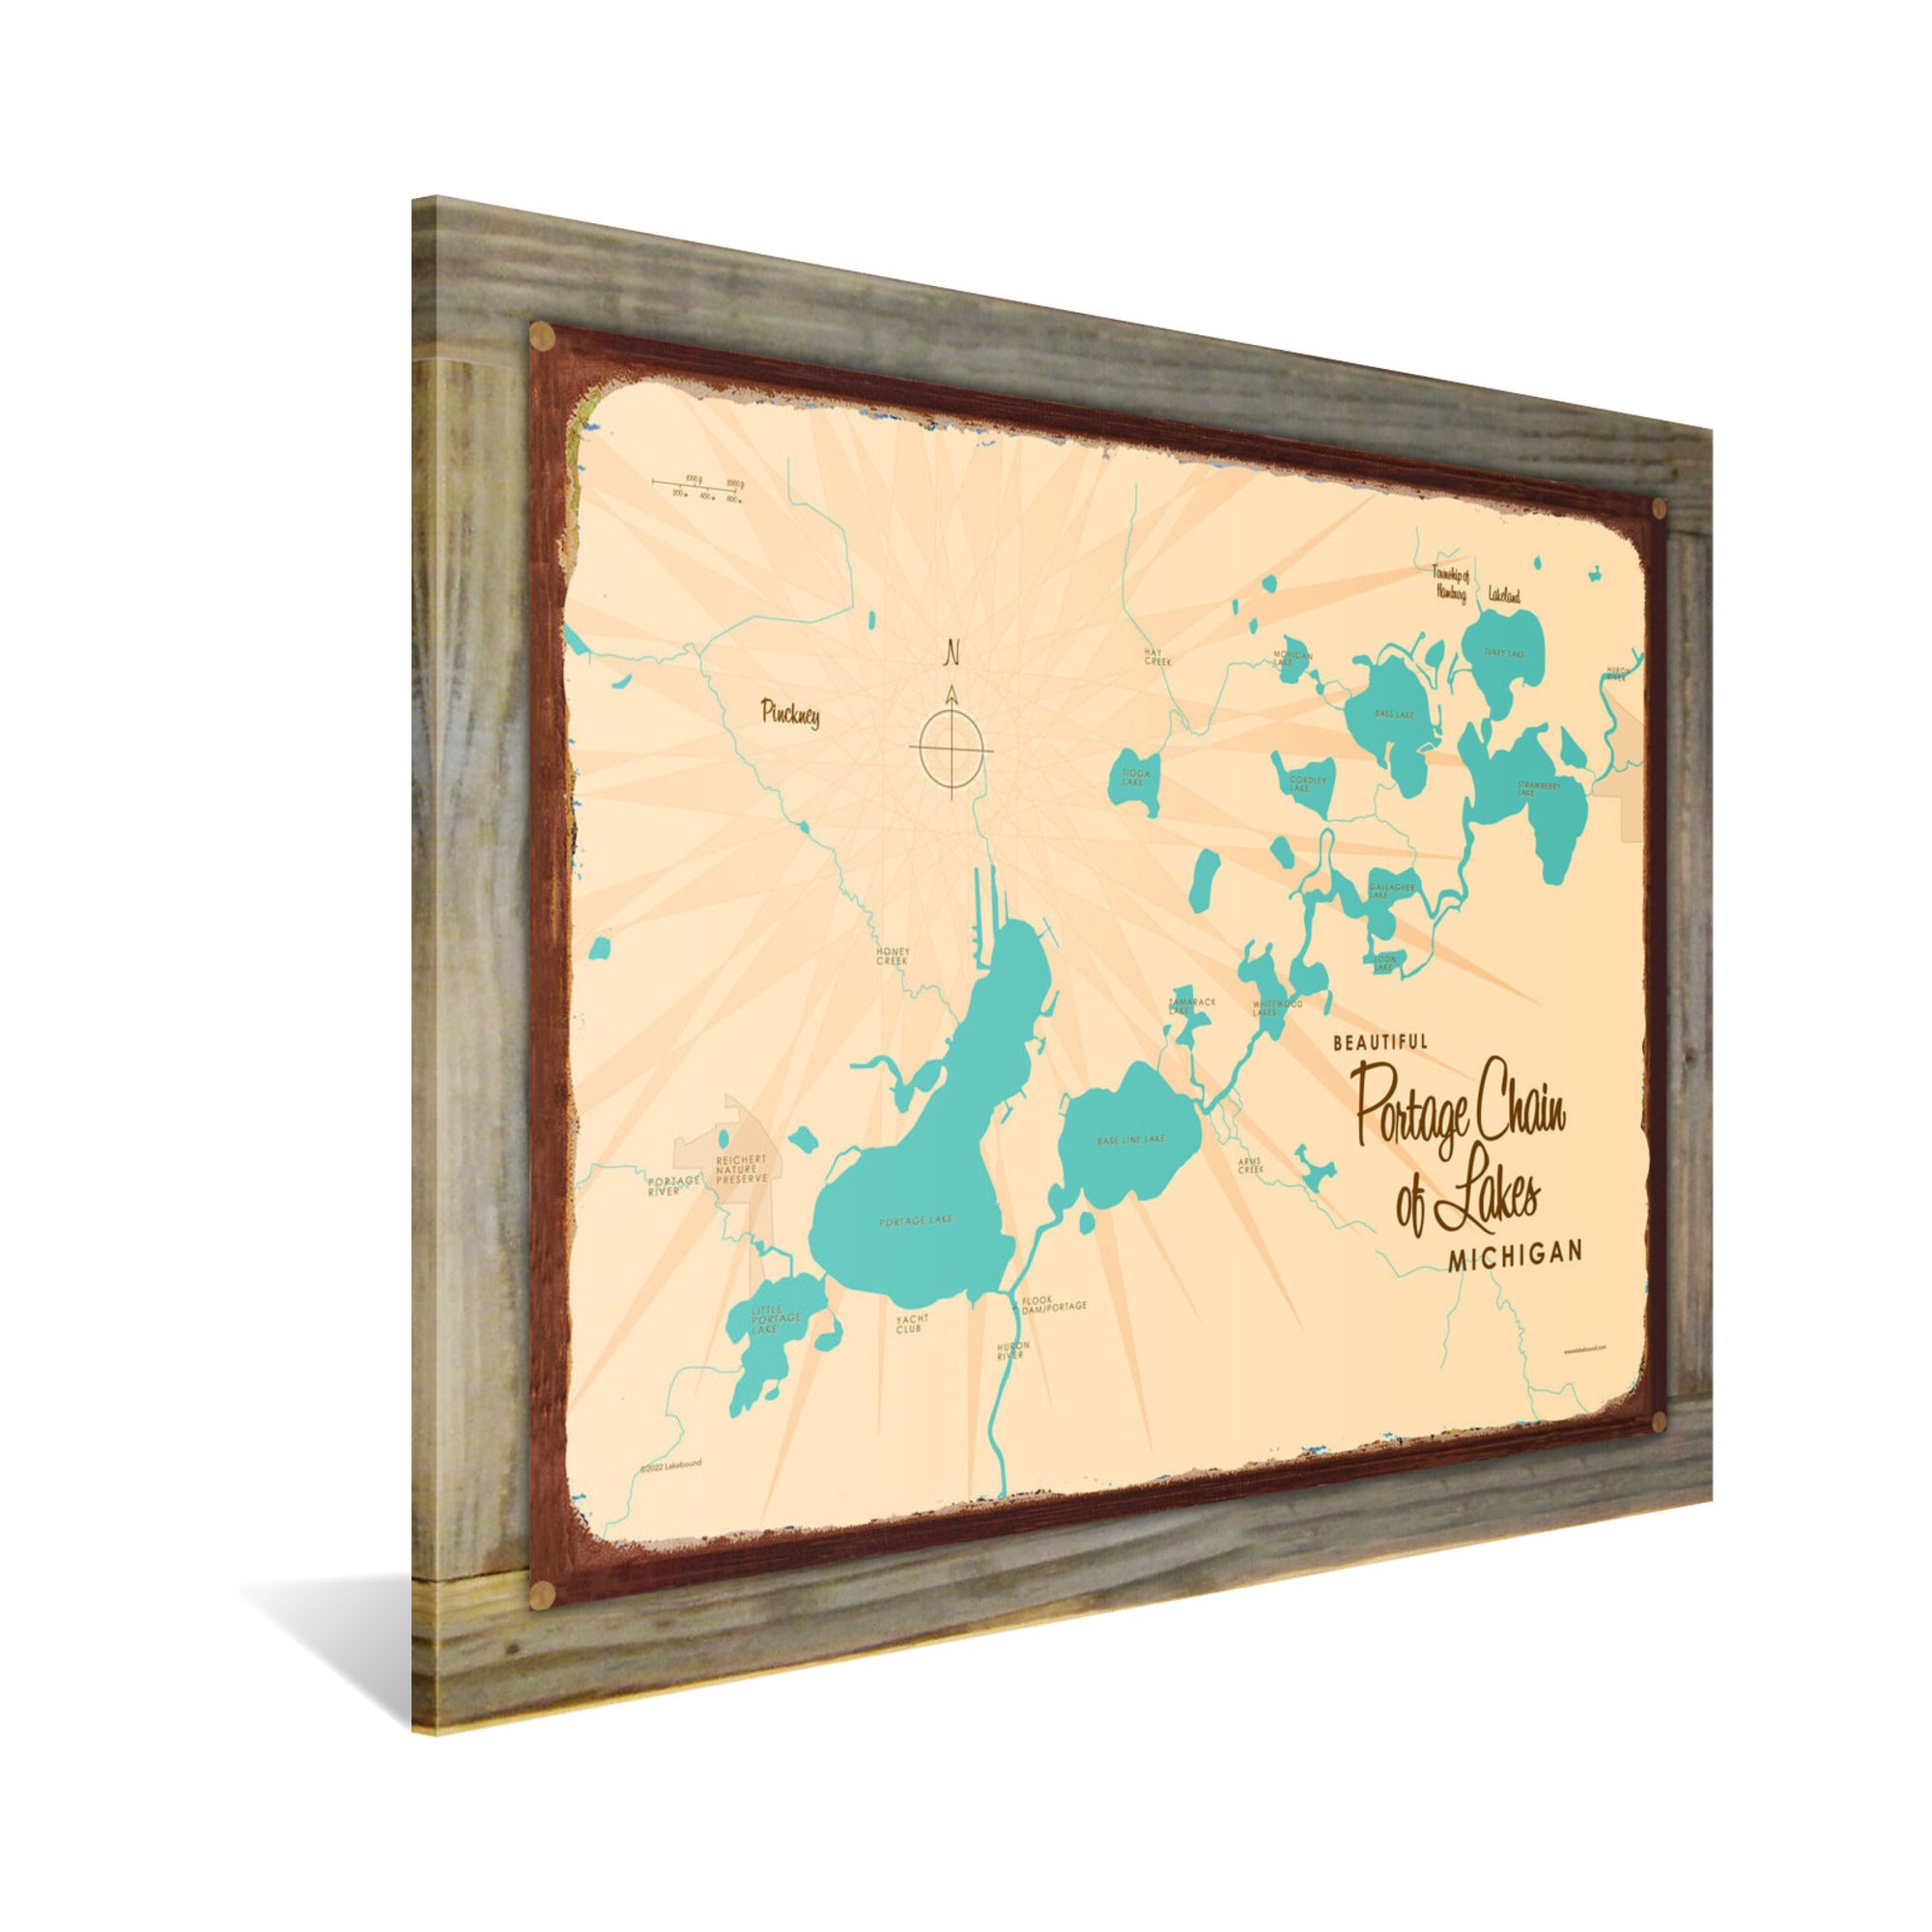 Portage Chain of Lakes Michigan, Wood-Mounted Rustic Metal Sign Map Art